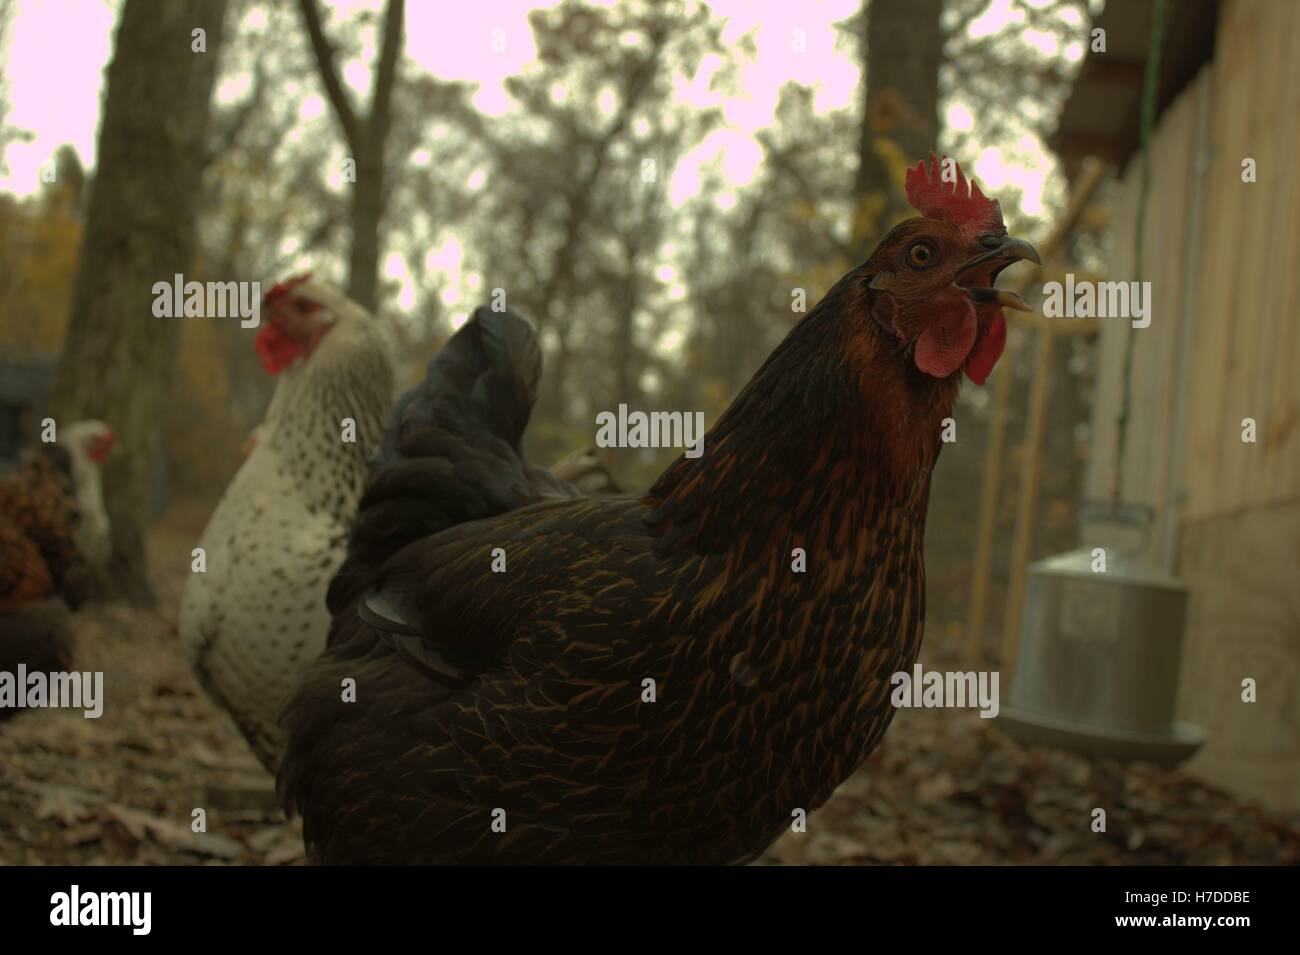 My Black Sexlink Hen Named Fussy, Doing What She Does Best; Fussing Stock Photo